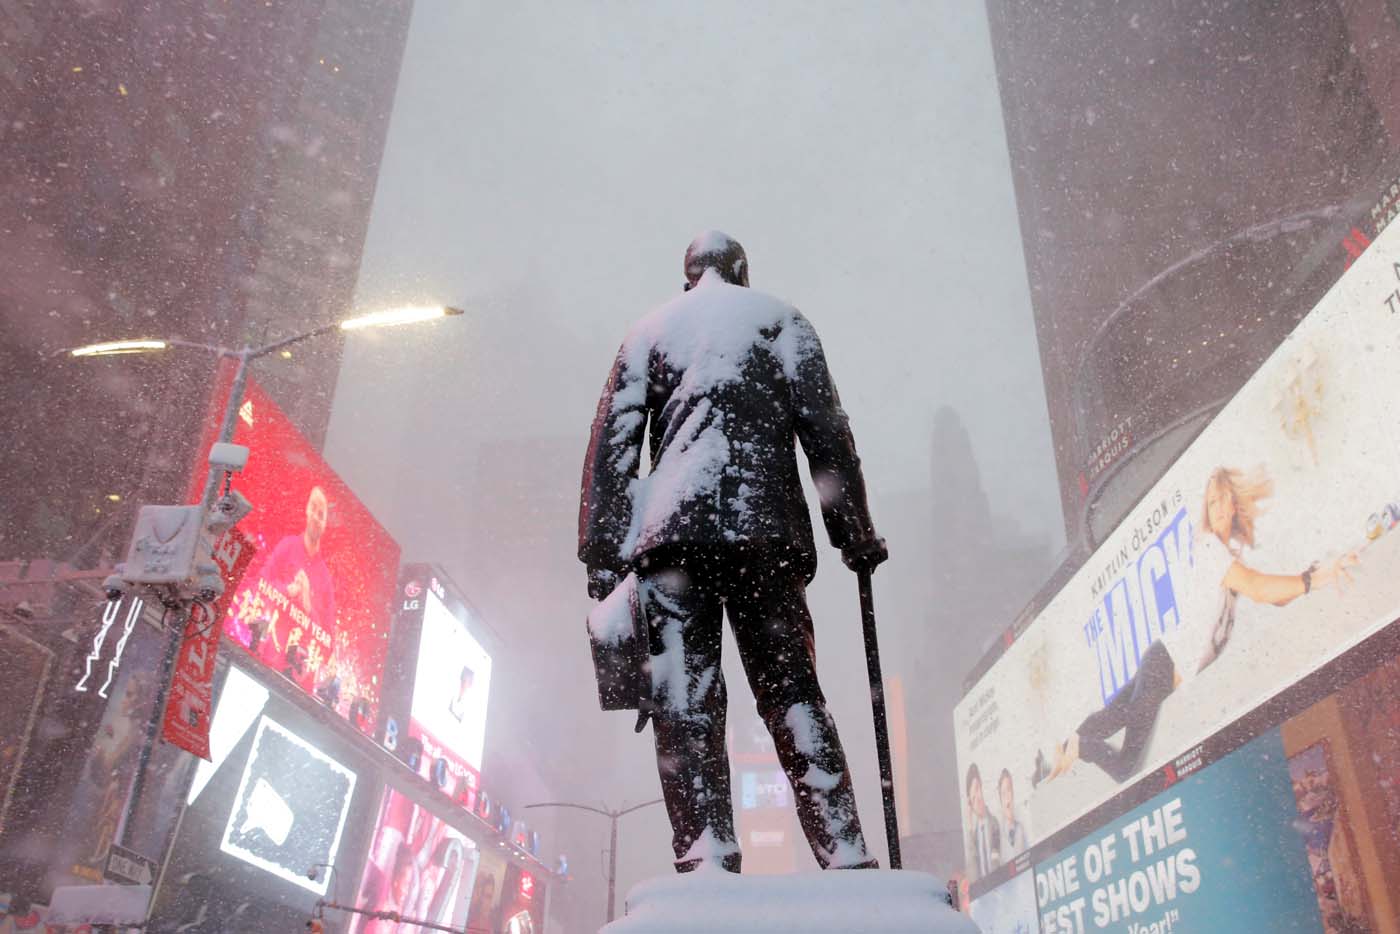 A statue of American composer, playwright, actor, and producer George M. Cohan stands in Times Square as snow falls in Manhattan, New York, U.S. February 9, 2017. REUTERS/Andrew Kelly